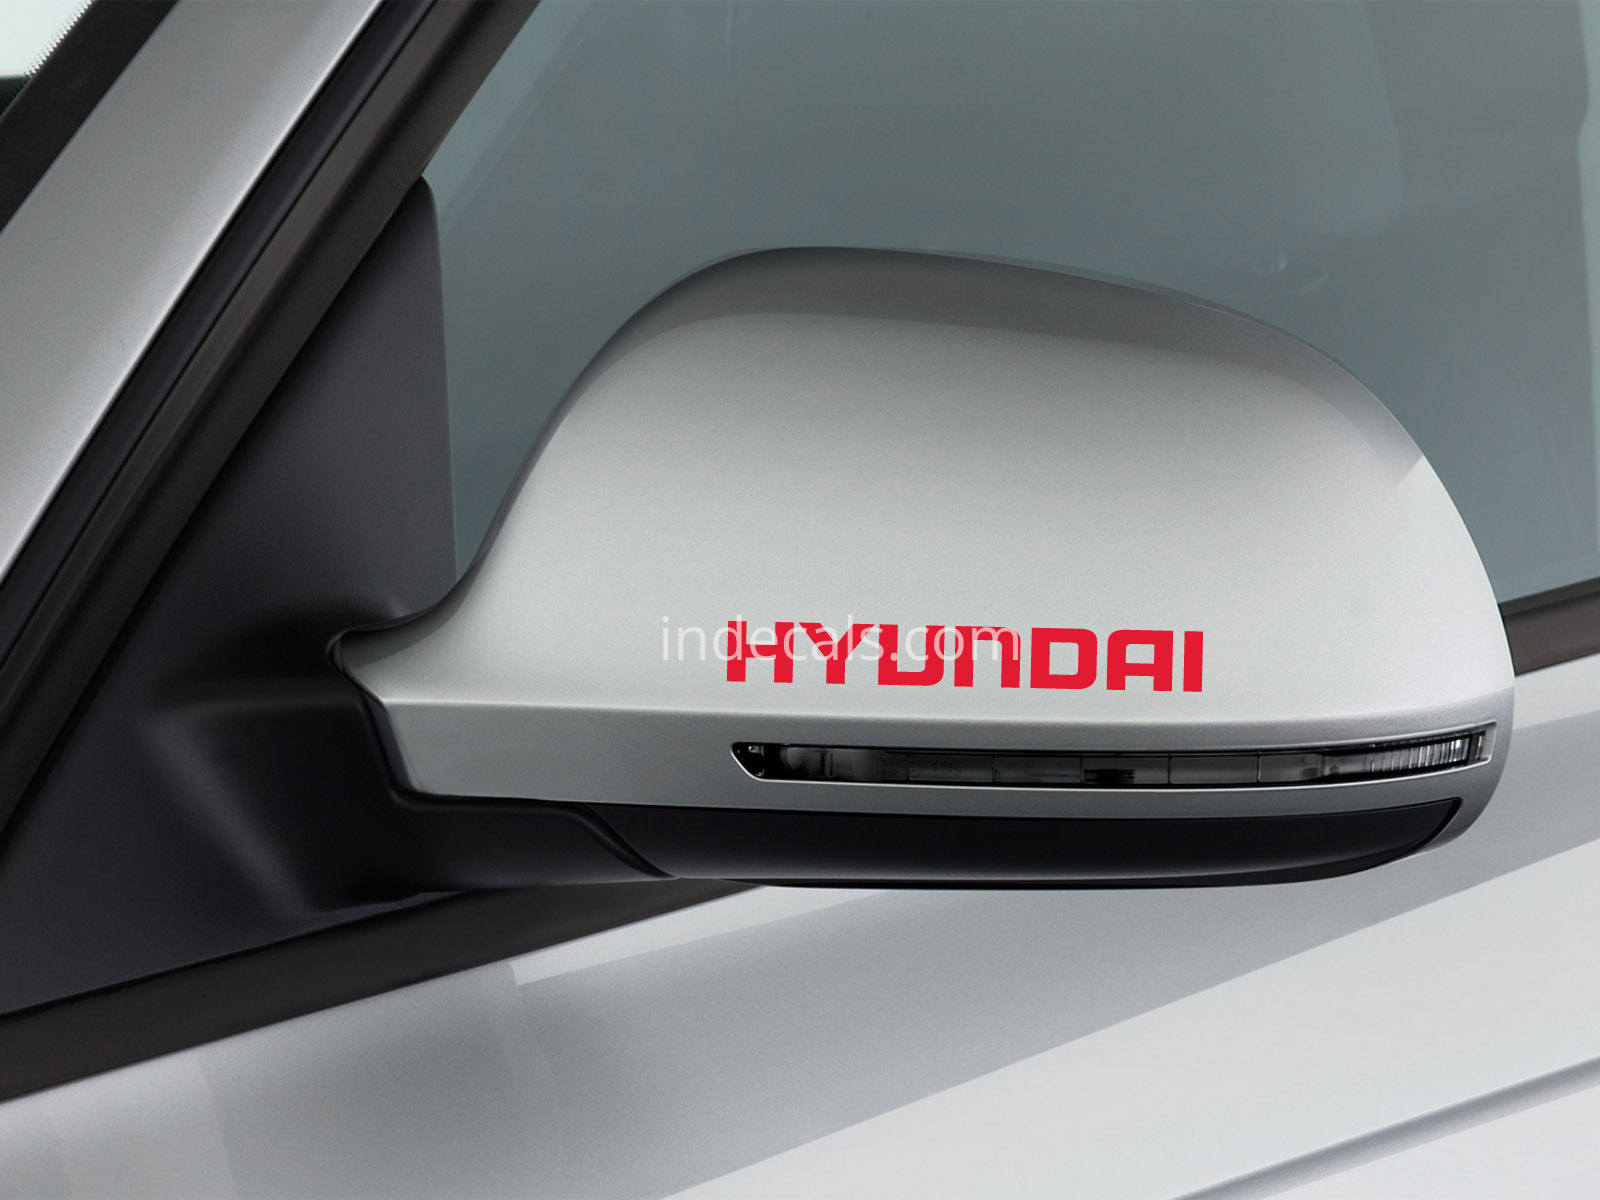 3 x Hyundai Stickers for Mirrors - Red